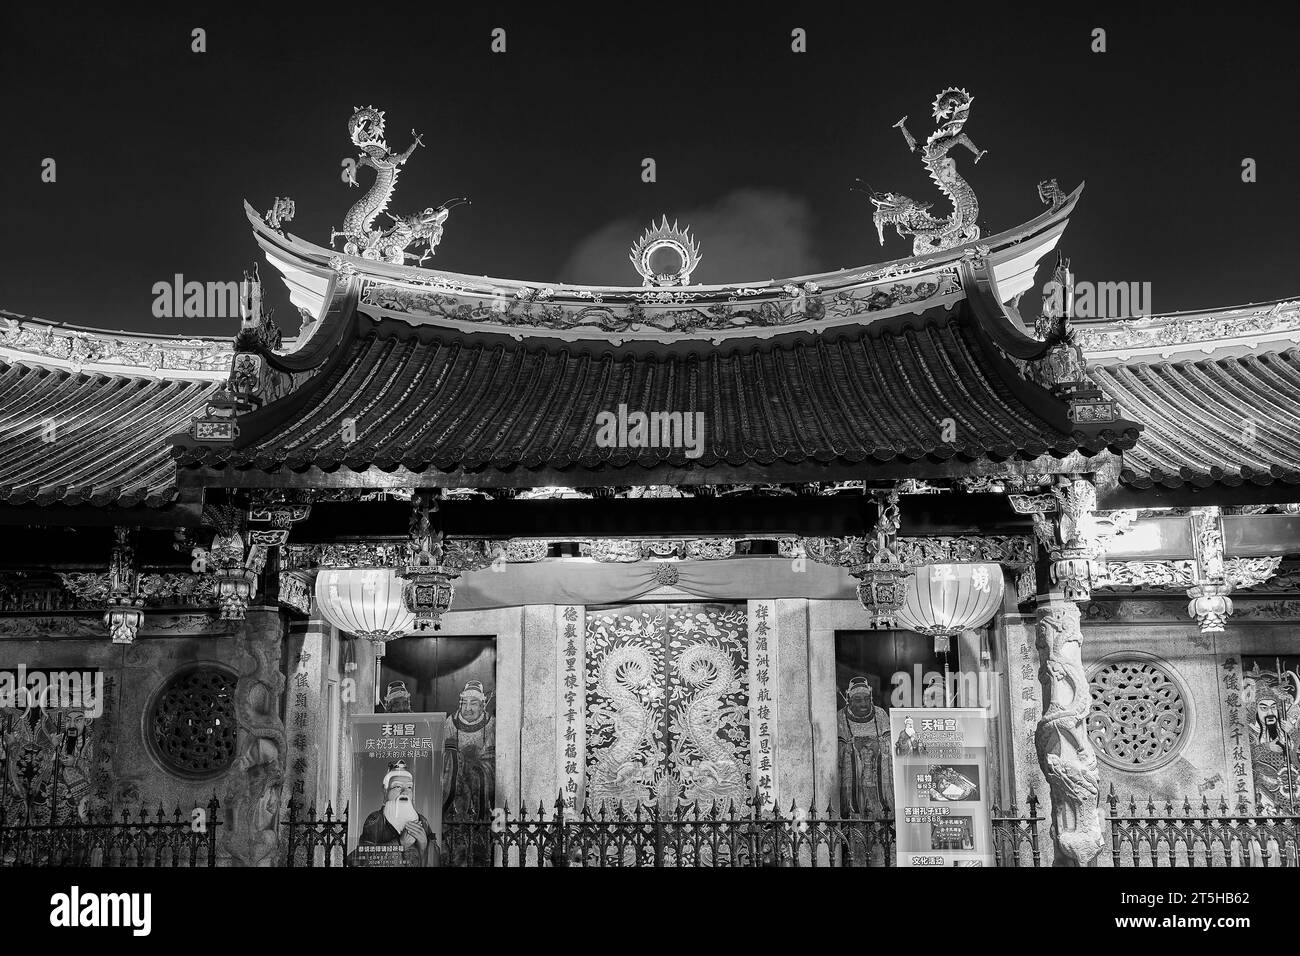 Black And White Photo Of The Entrance To The Thian Hock Keng Temple After Dark, Telok Ayer Street, Singapore. Stock Photo